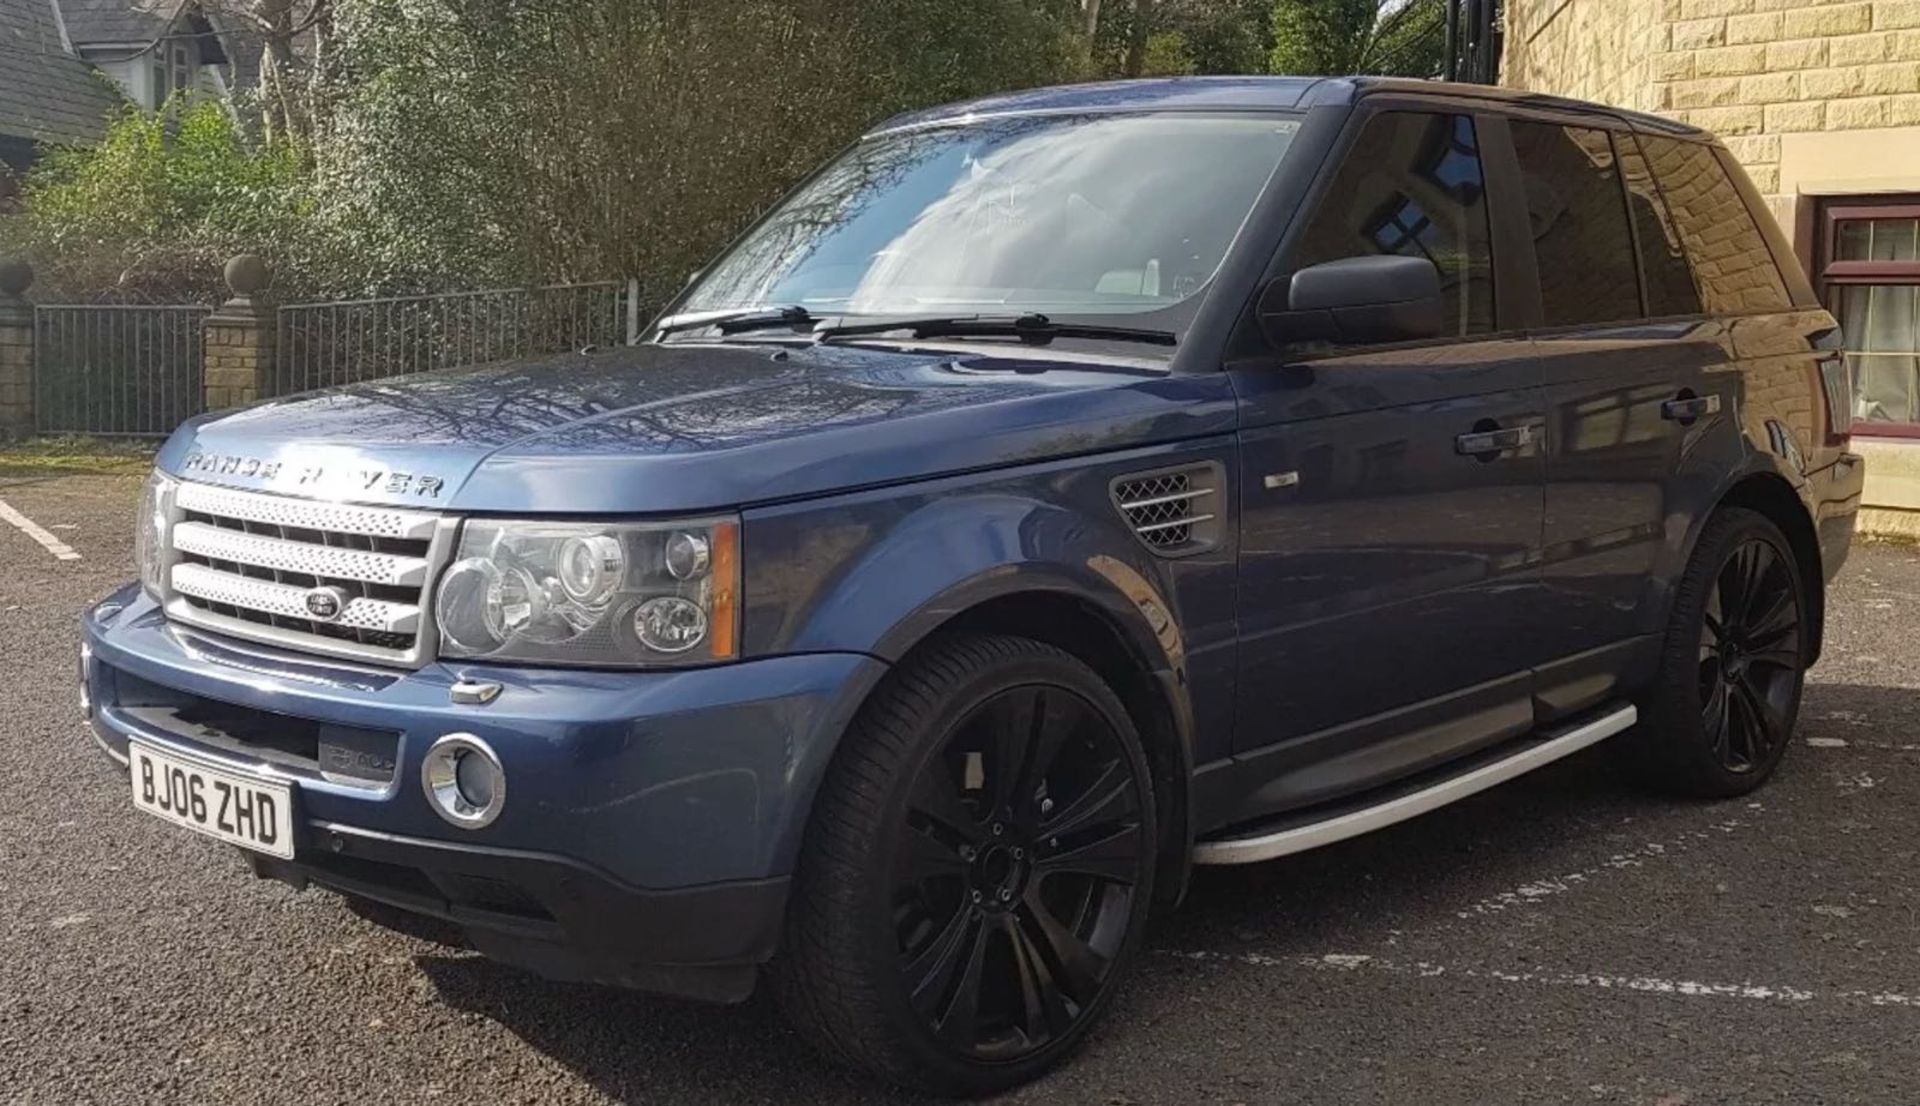 2006/06 REG LAND ROVER RANGE ROVER SPORT V8 SUPER CHARGED STD AUTOMATIC - Image 2 of 11